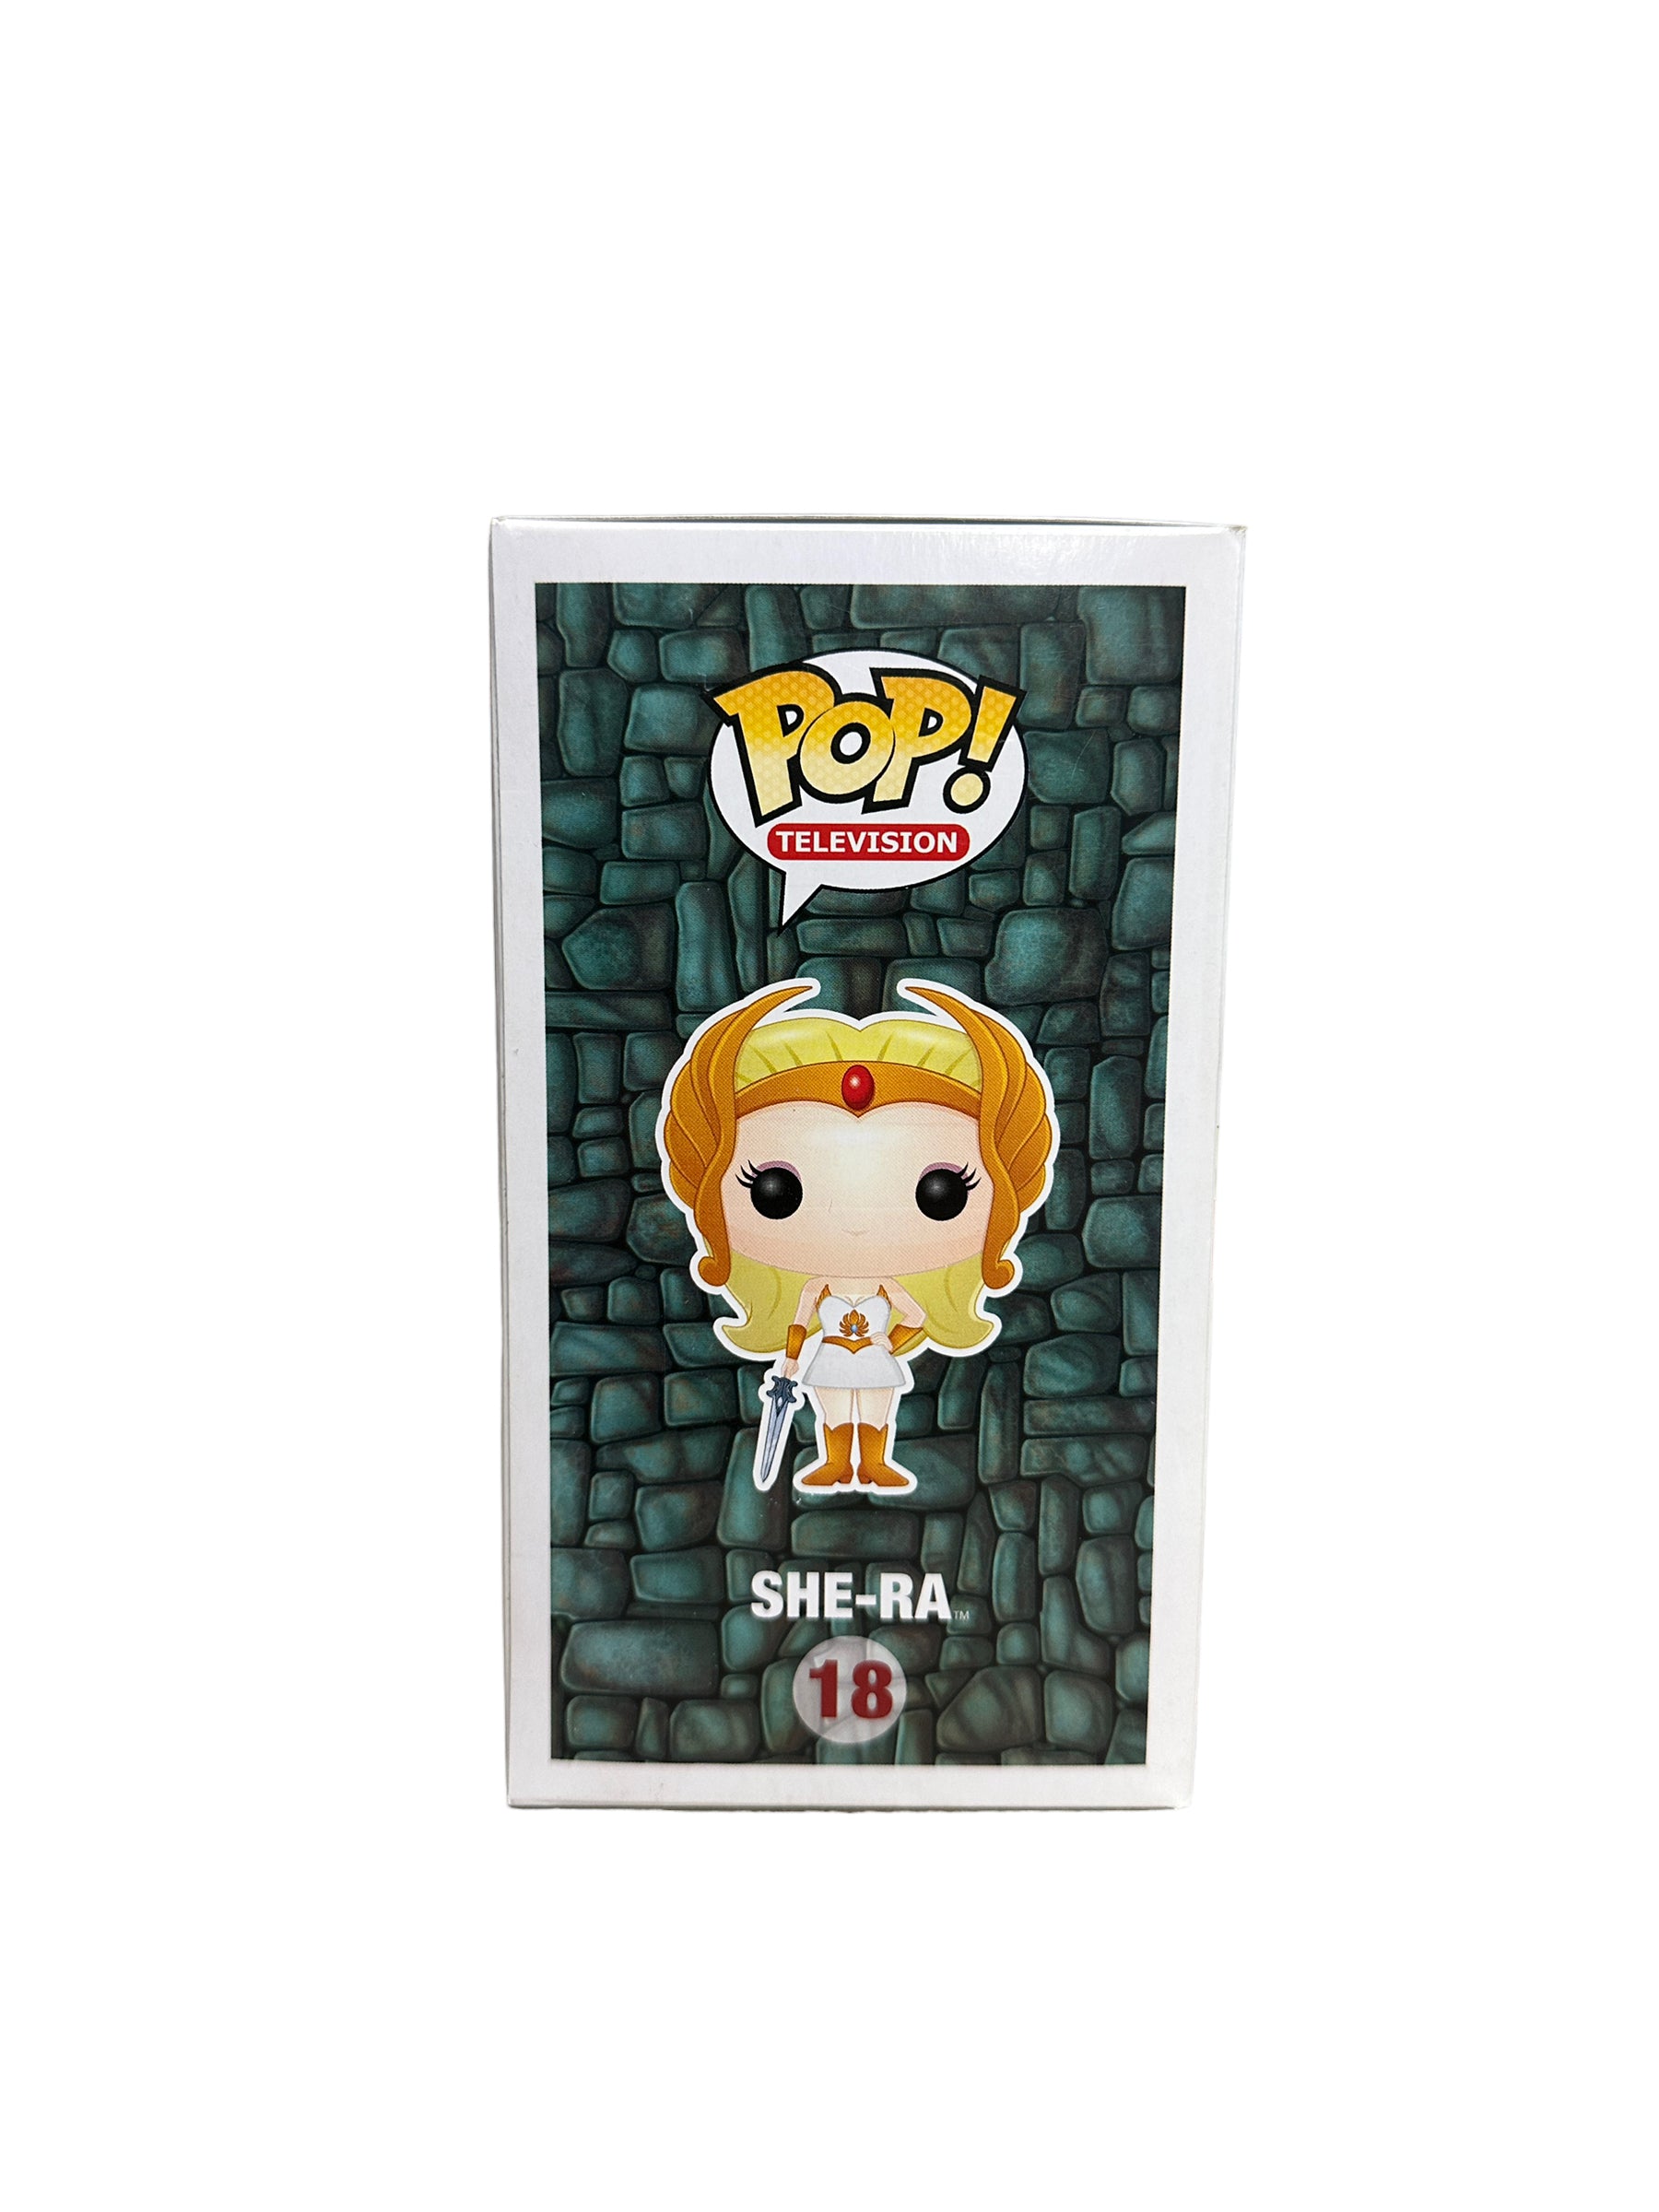 She-Ra #18 Funko Pop! - Masters of the Universe - 2013 Pop! - Condition 8.5/10